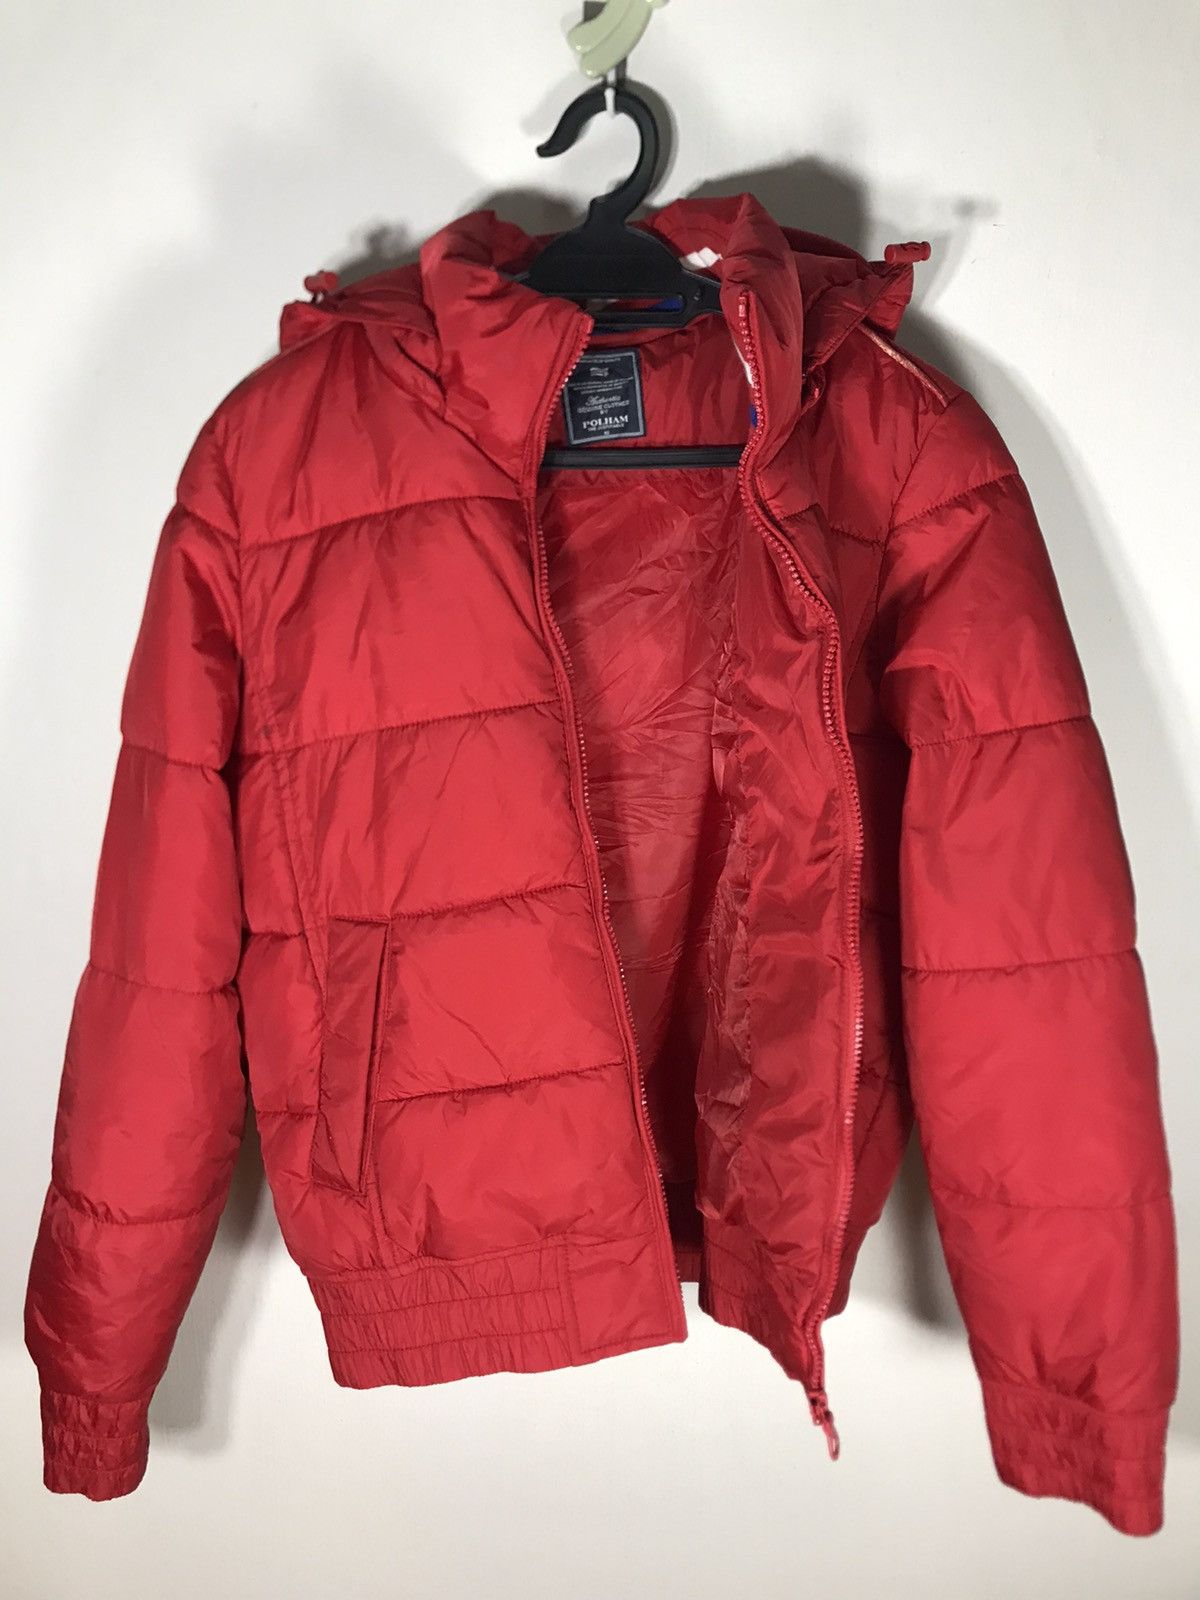 Red Jacket Polham detachable hoodie puffer jacket spell out embroidered Size US M / EU 48-50 / 2 - 7 Thumbnail